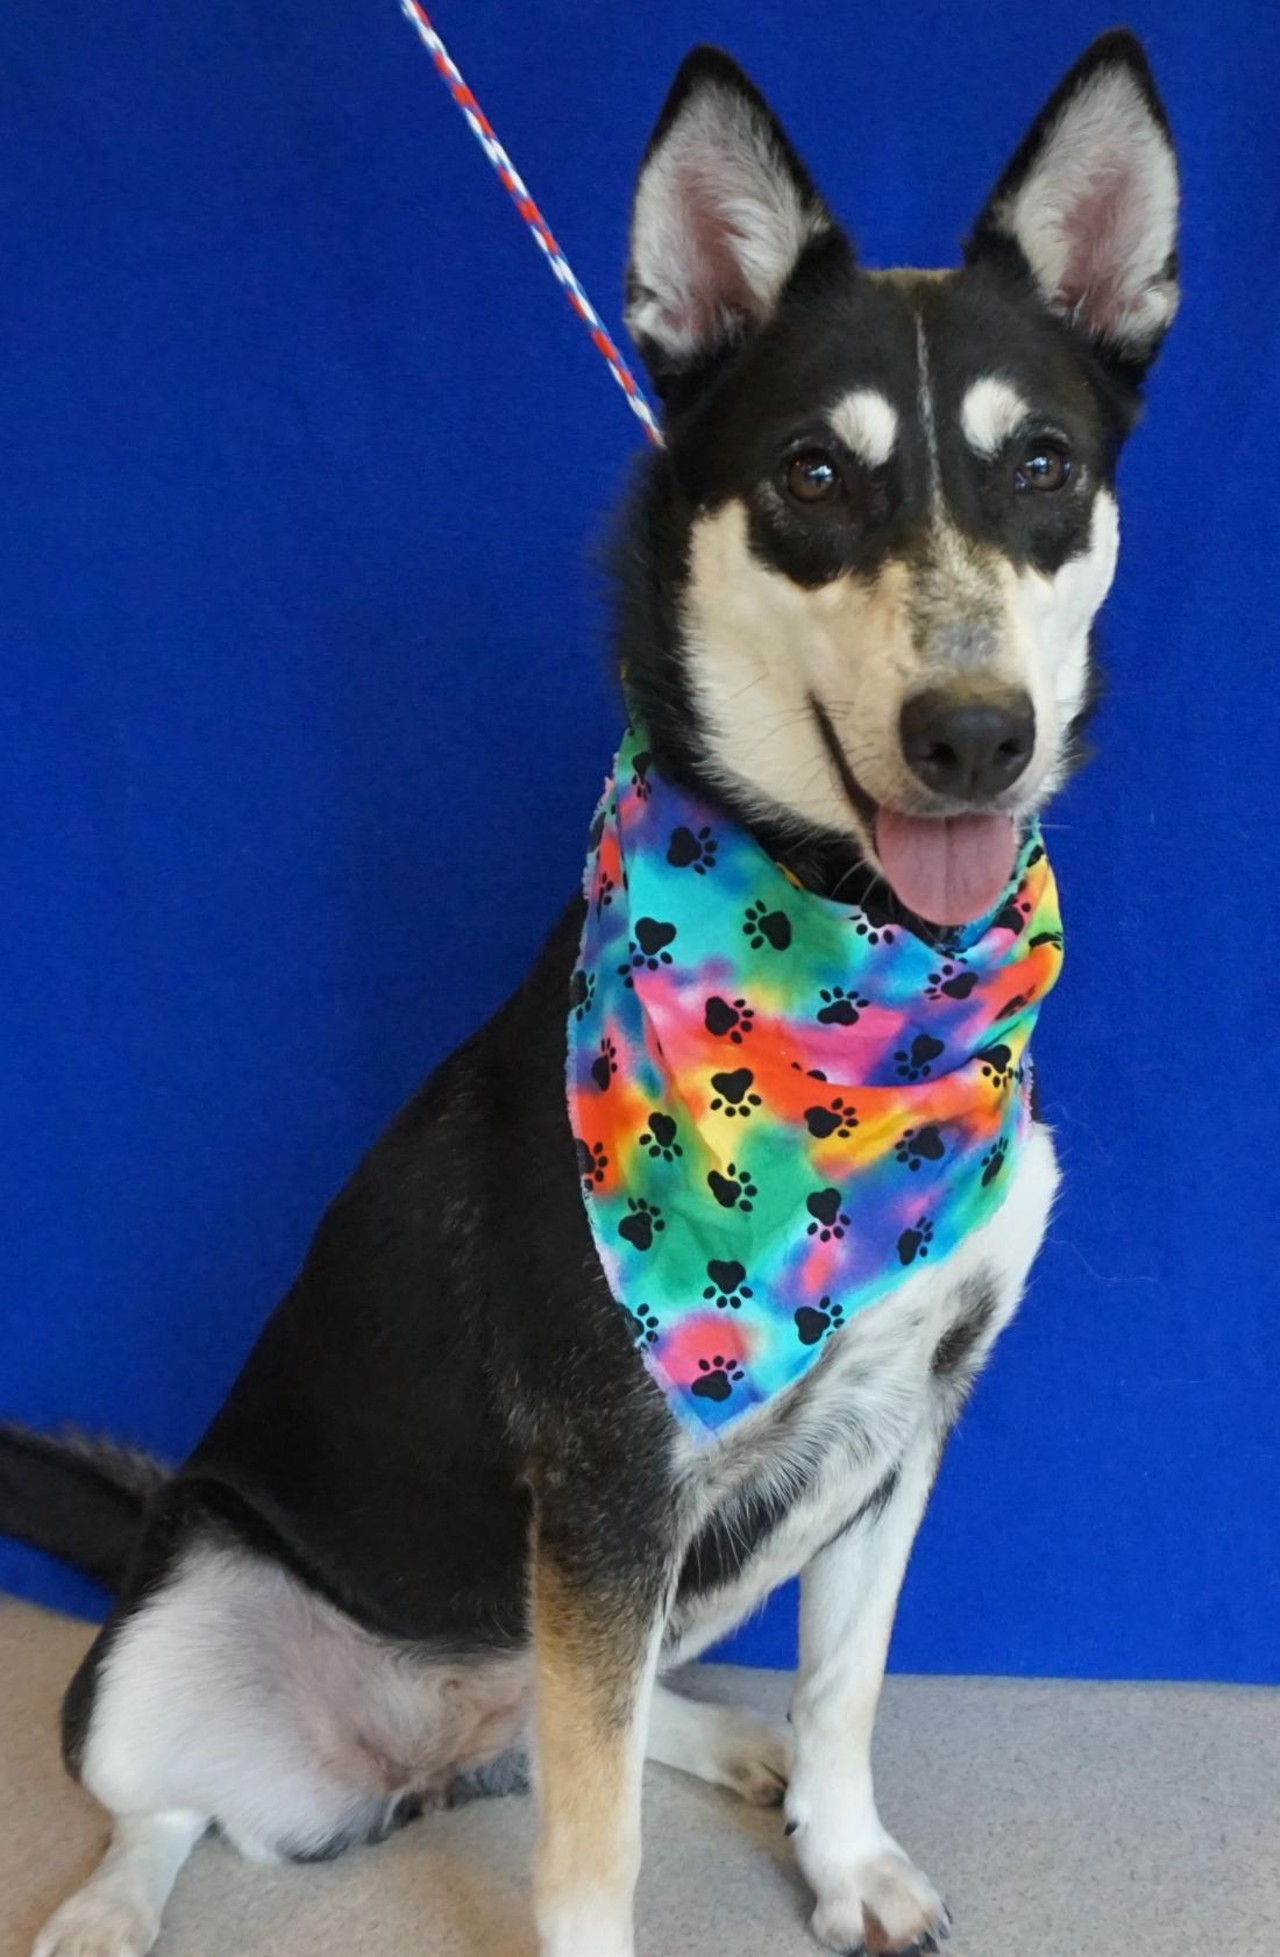 NAME: Kira 
GENDER: Female
BREED: Siberian Husky
AGE: 2 years, 2 months
WEIGHT: 44 pounds
SPECIAL CONSIDERATIONS: Kira prefers a home with older or no children and no small animals.
REASON I CAME TO MHS: Agency transfer
LOCATION: Rochester Hills Center for Animal Care
ID NUMBER: 869111